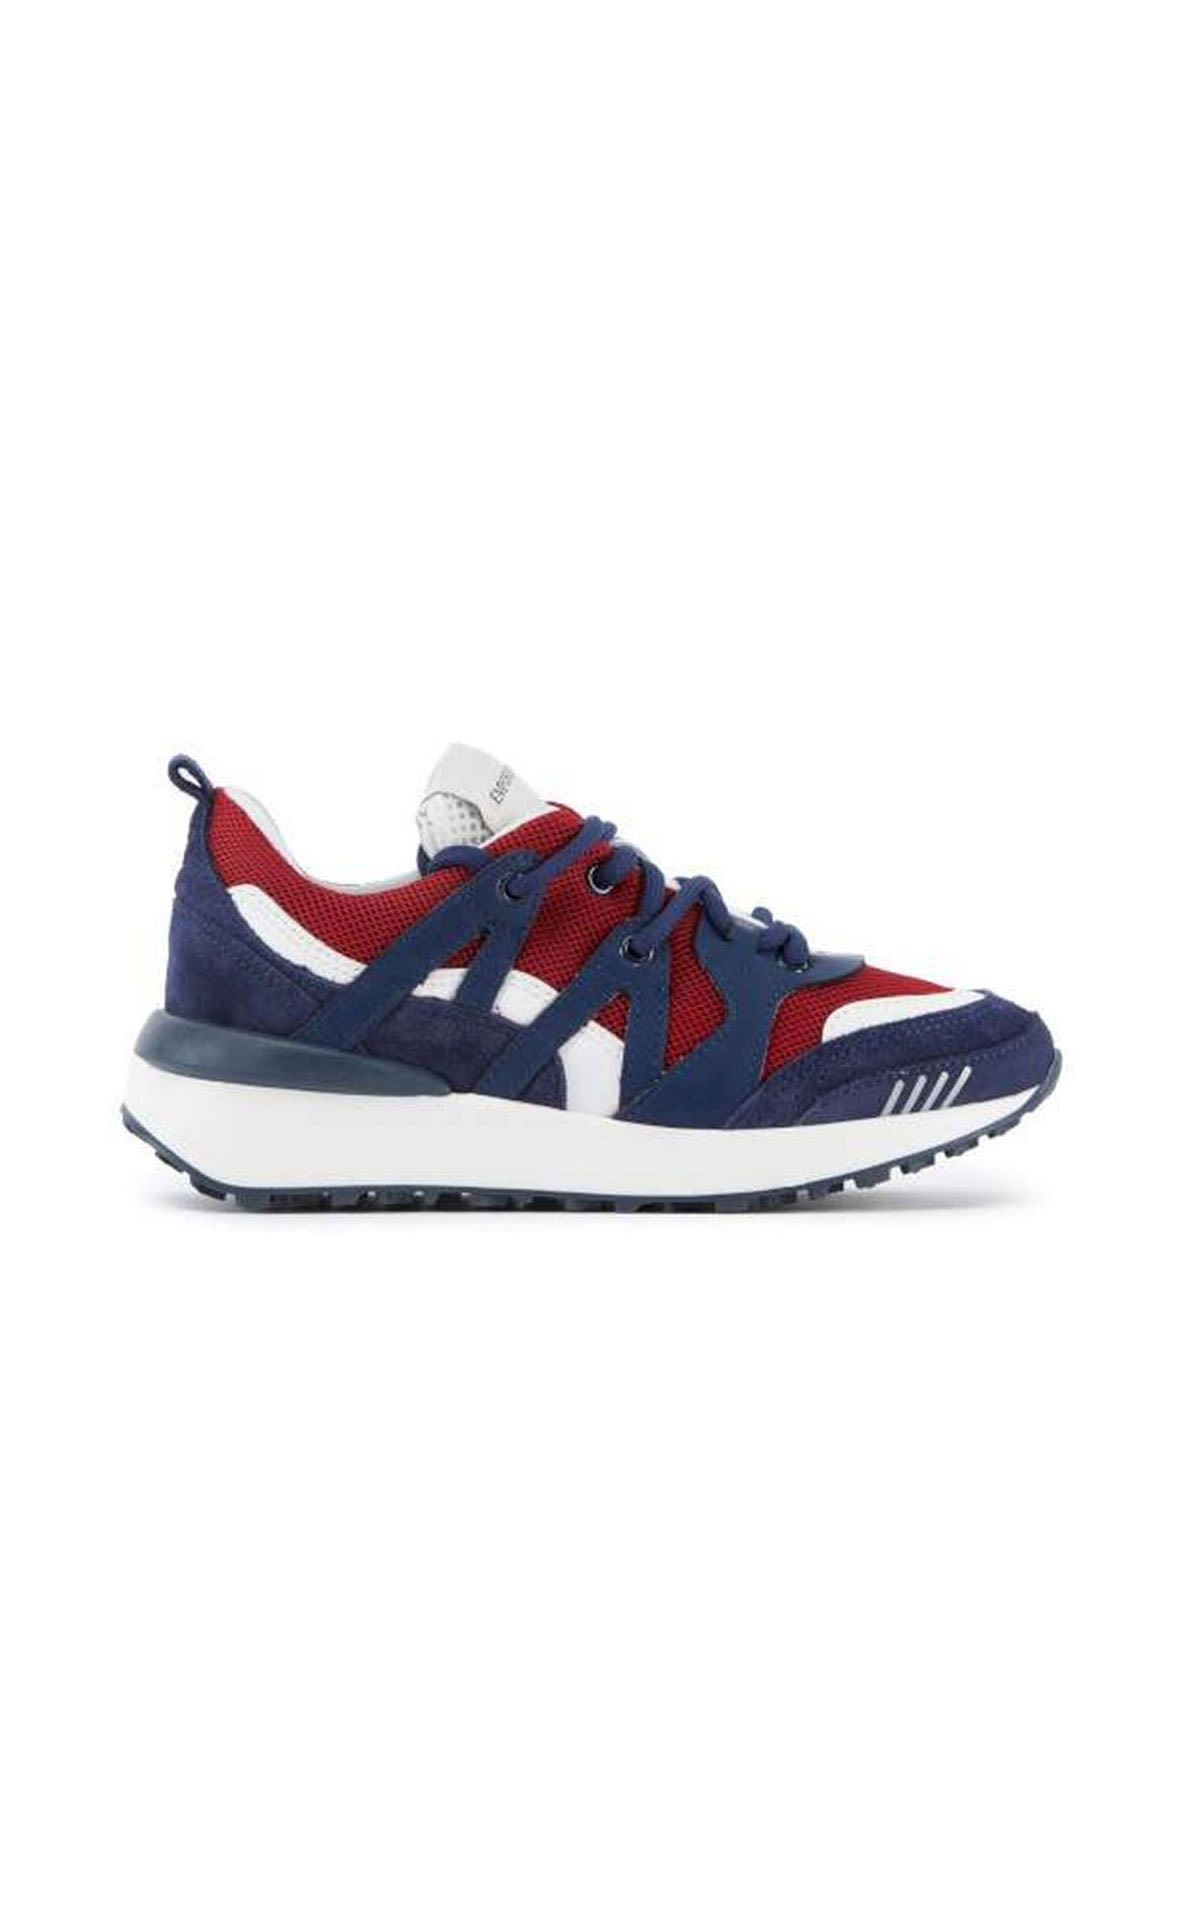 Blue, red and white sneaker armani